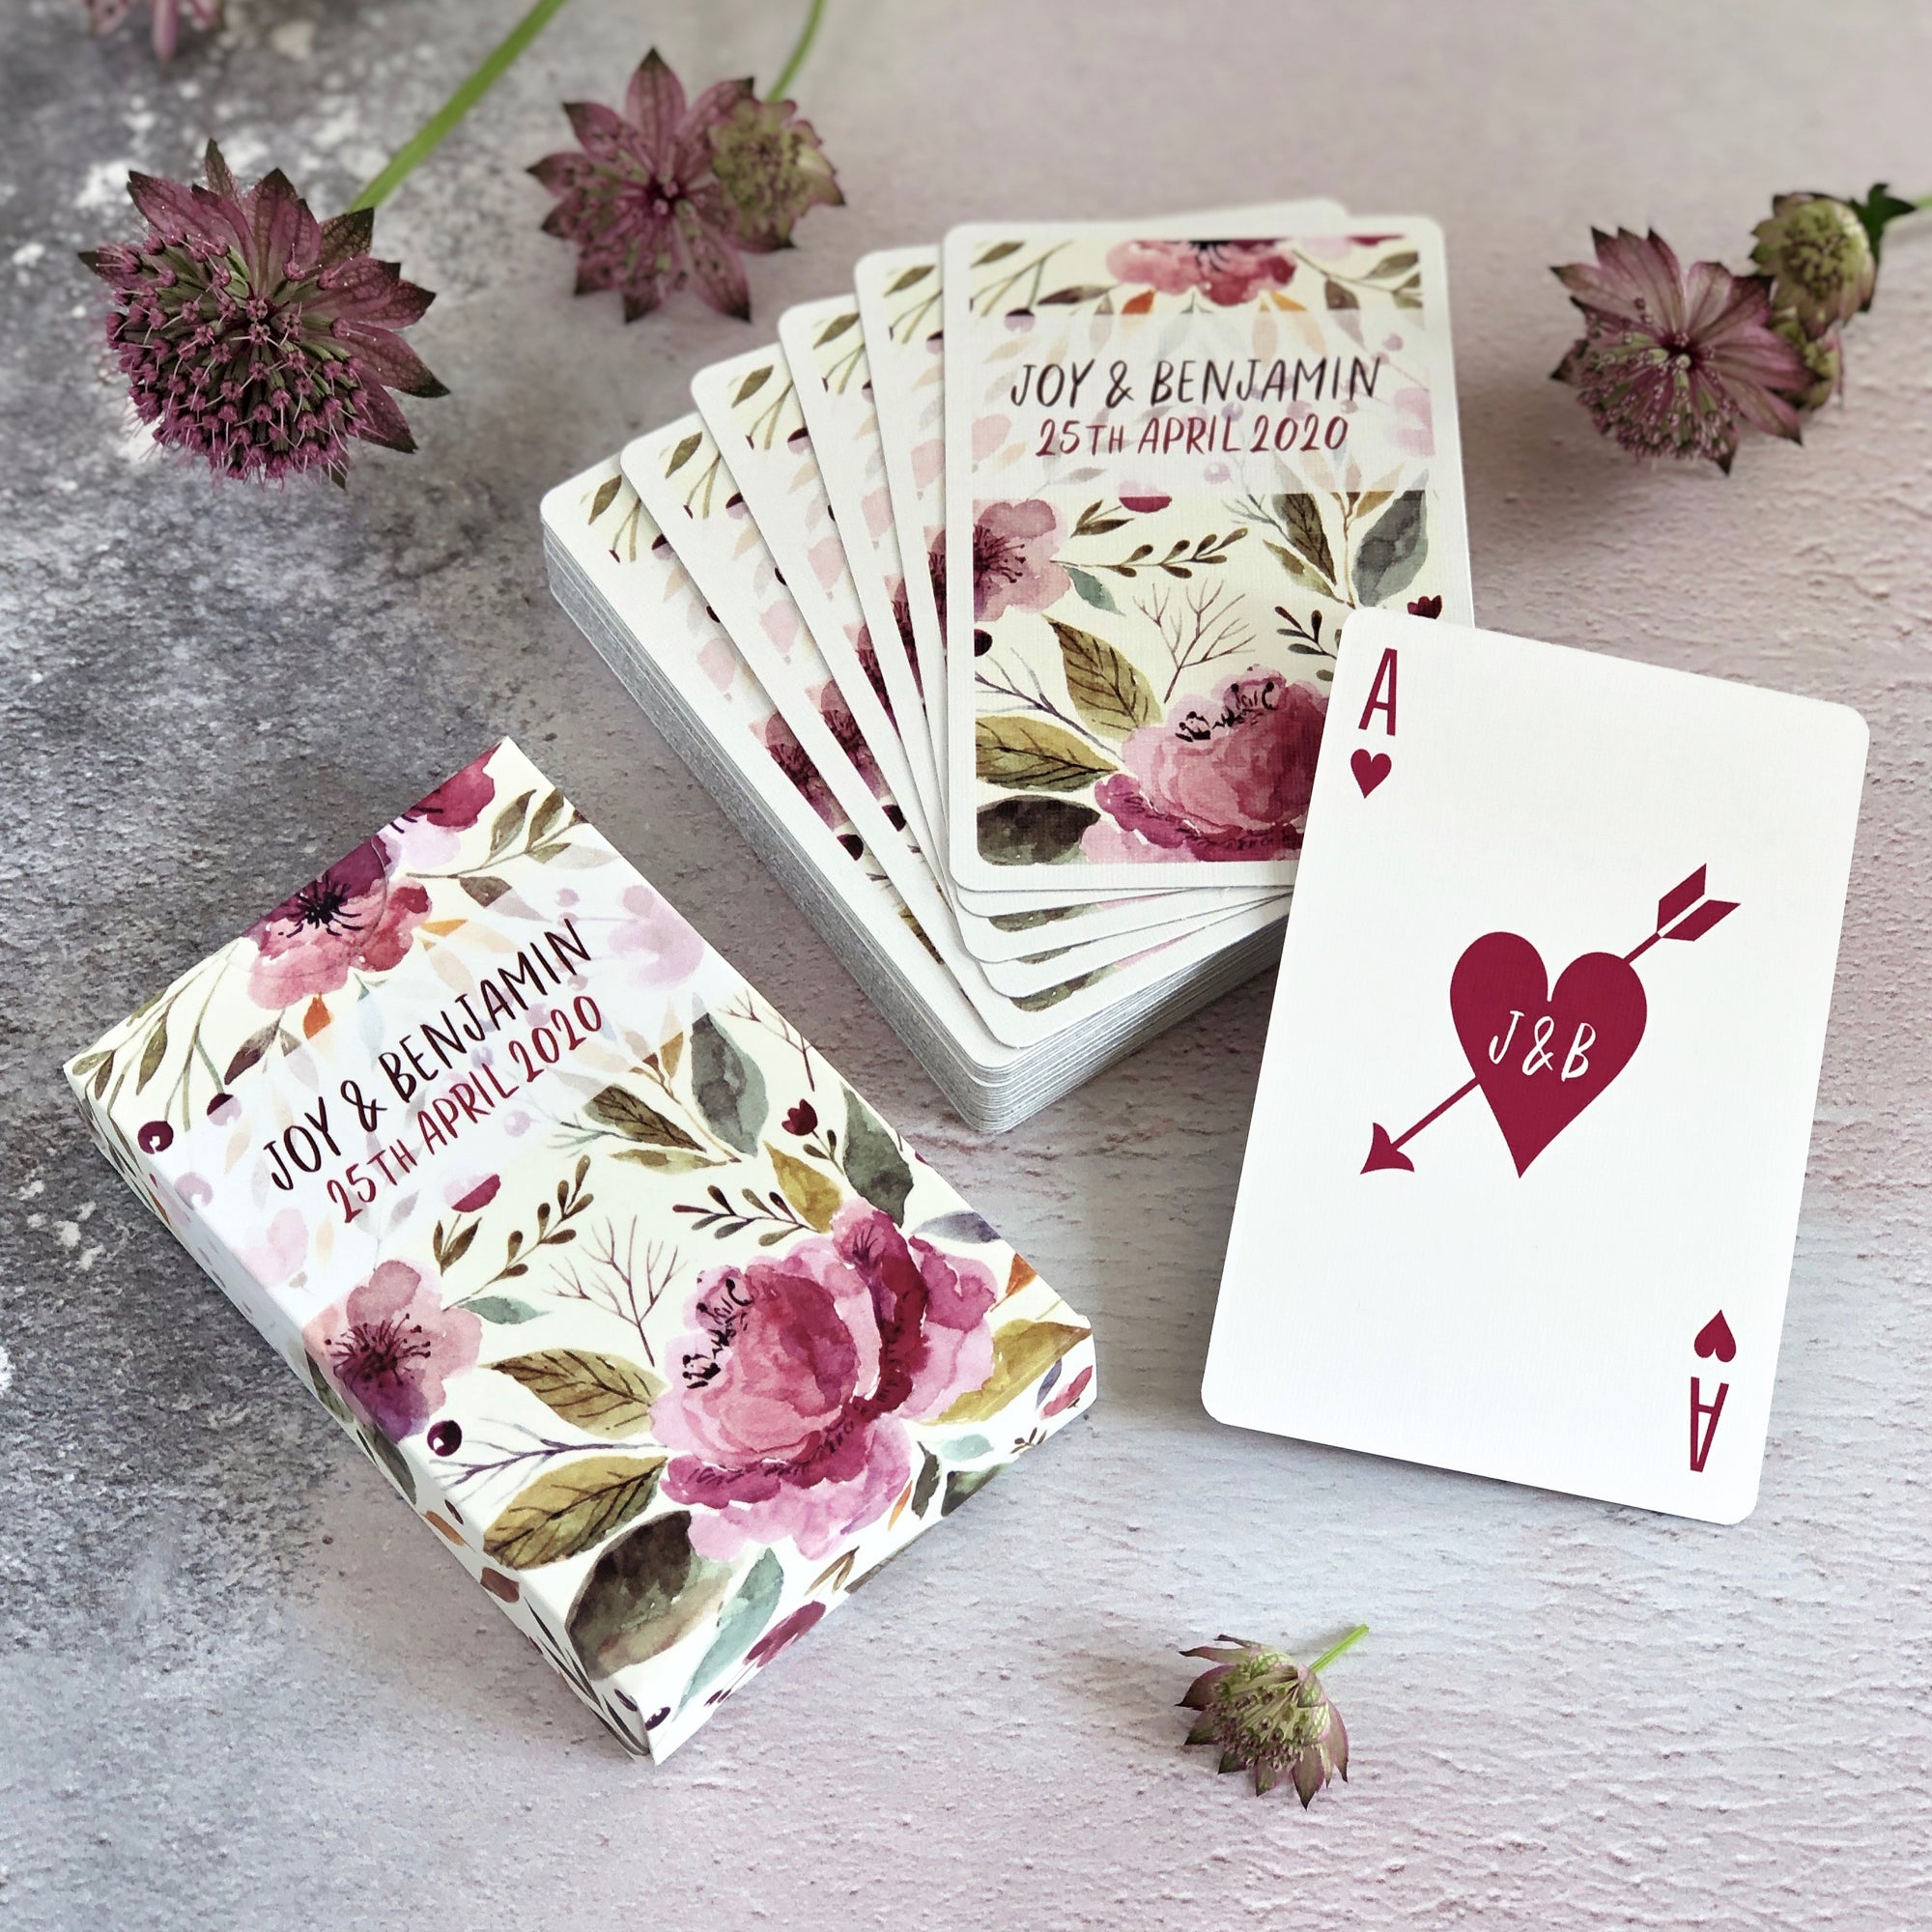 Personalised playing card wedding favours with a floral design